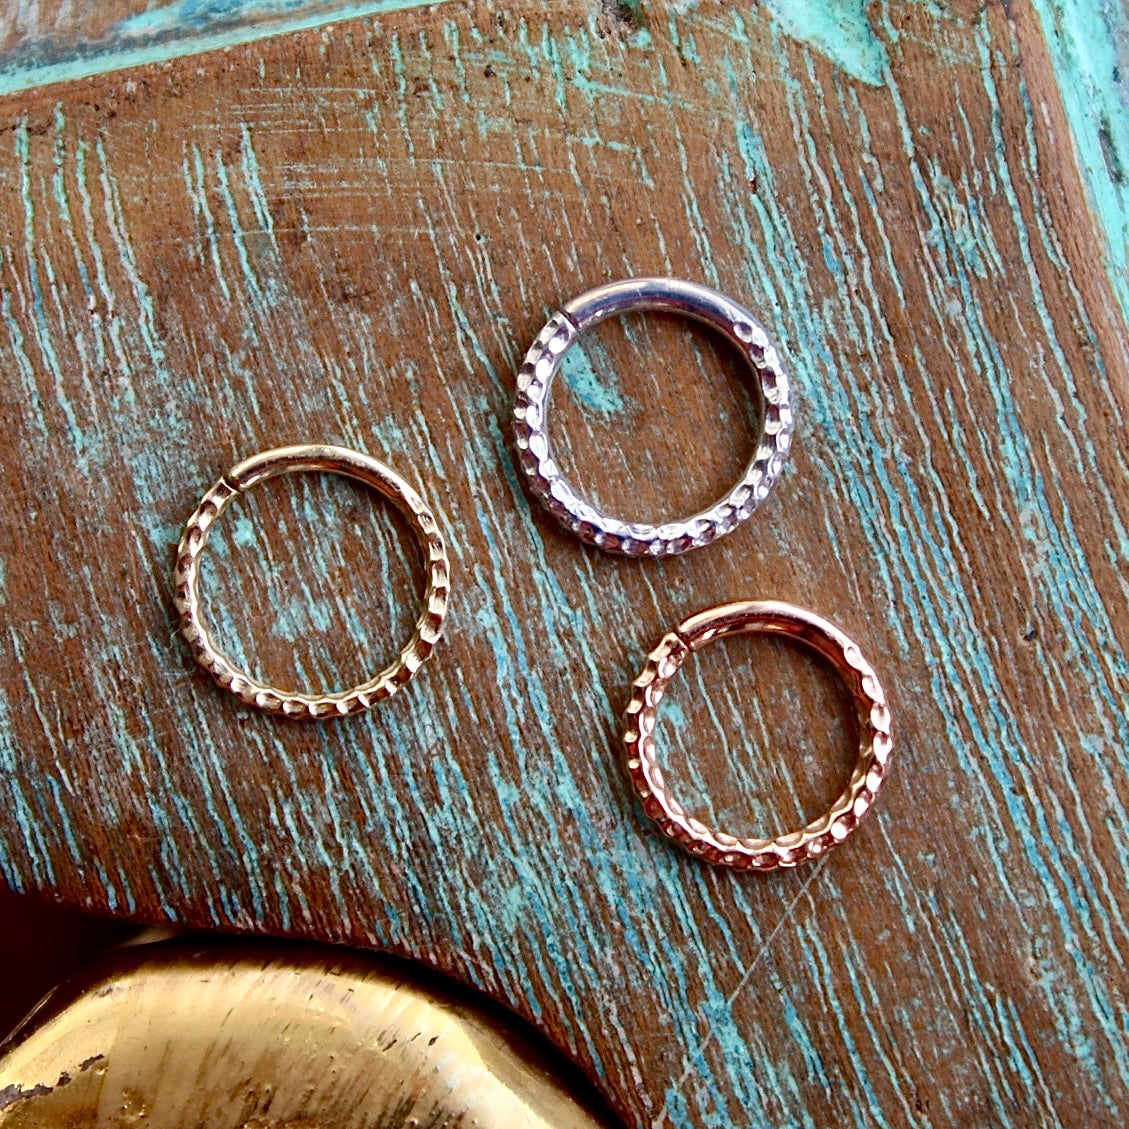 BVLA's "Hammered Seam Ring" shown from left to right in 14k Yellow gold, 14k White gold and 14k Rose gold. Shown on a background featuring a piece of wood with blue paint on top and a small golden piece on the bottom of the photo